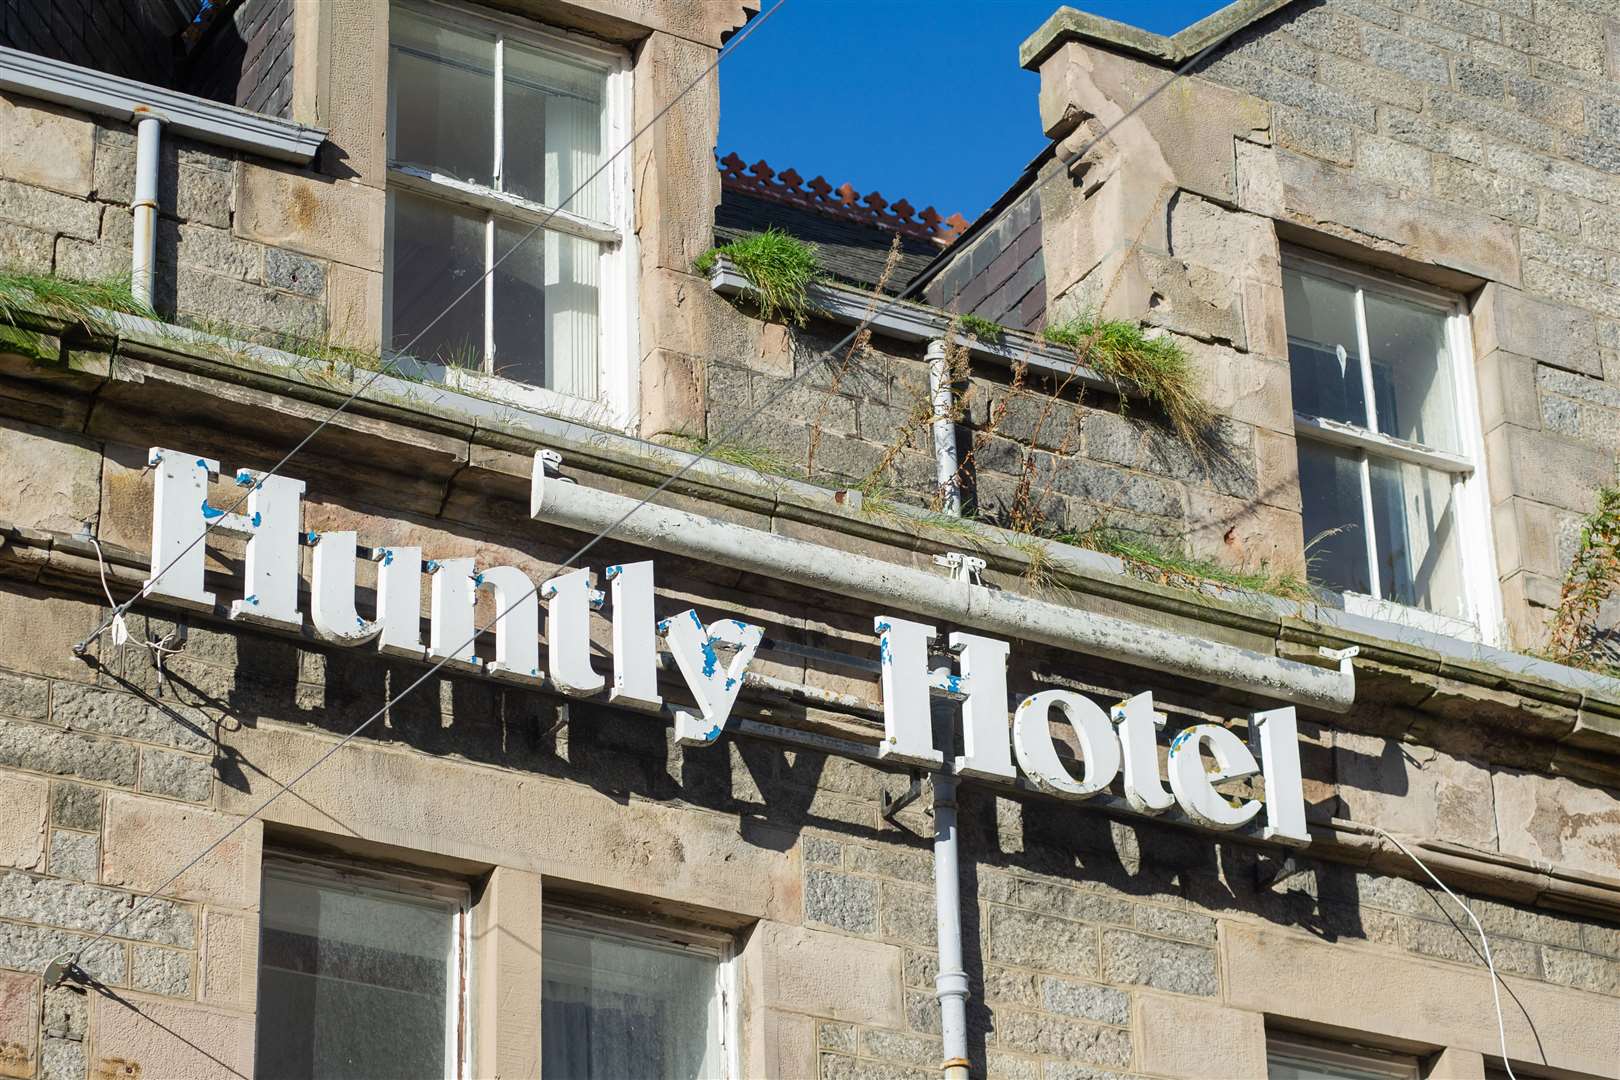 Weeds and cracked stonework on the Huntly Hotel. Picture: Daniel Forsyth.